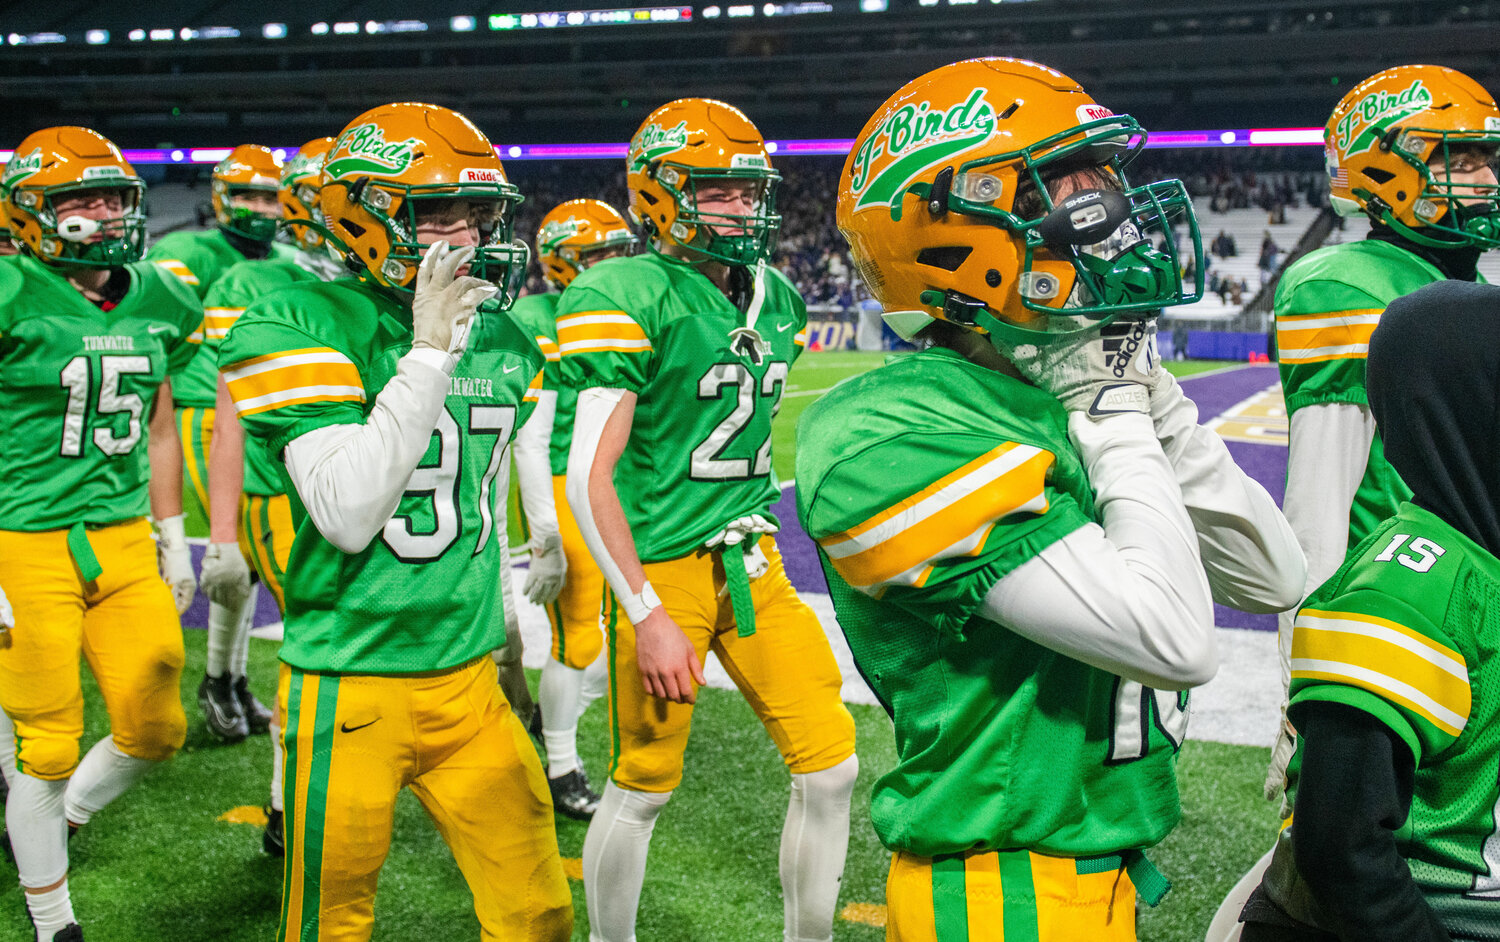 Tumwater reacts after a loss to Anacortes in the 2A State Championship game on Saturday, Dec. 2 at Husky Stadium.